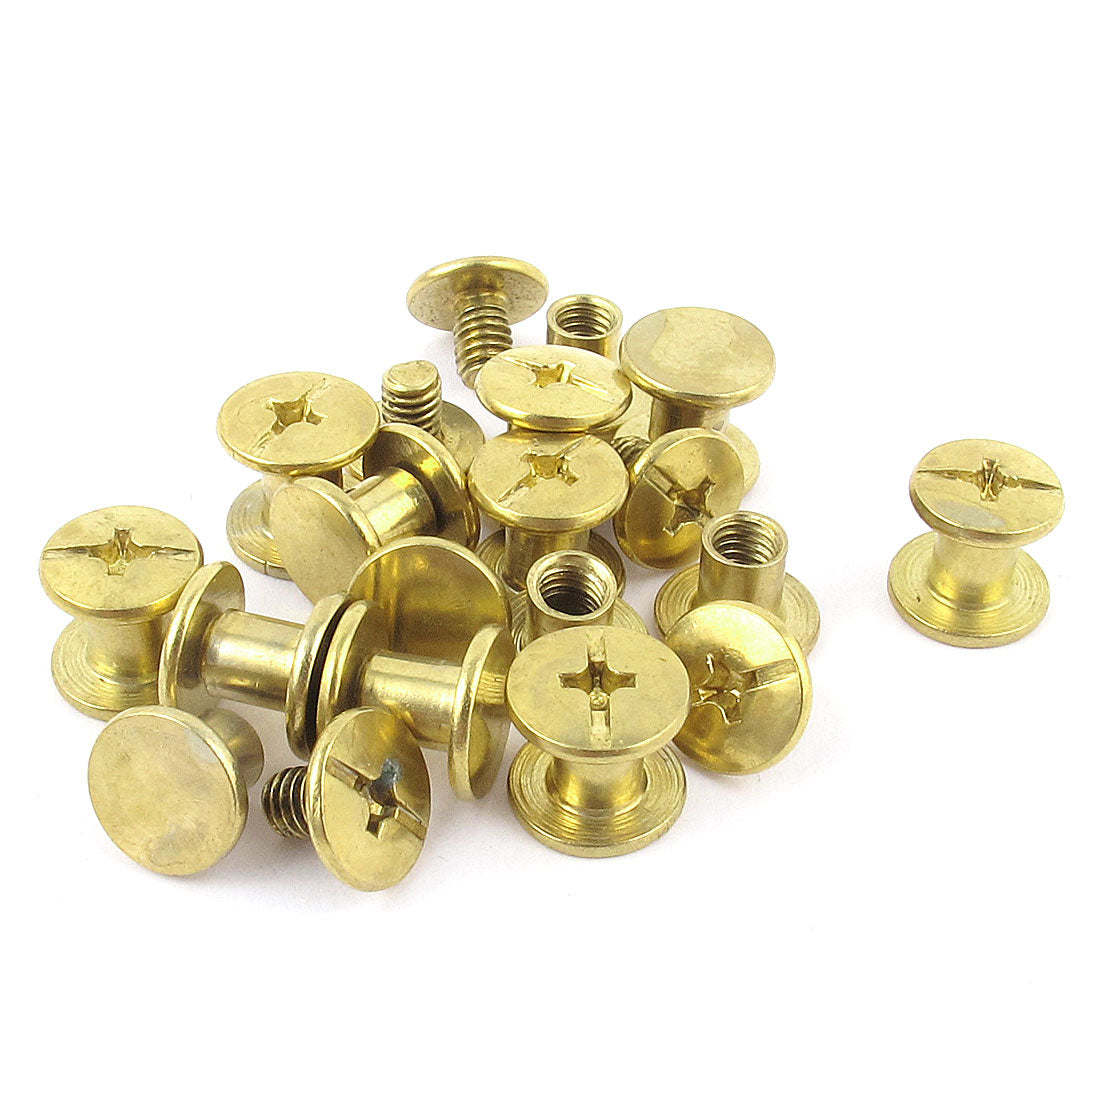 uxcell Uxcell 15pcs 5mmx6mm Brass Plated Binding Chicago Screw Post for Leather Purse Belt